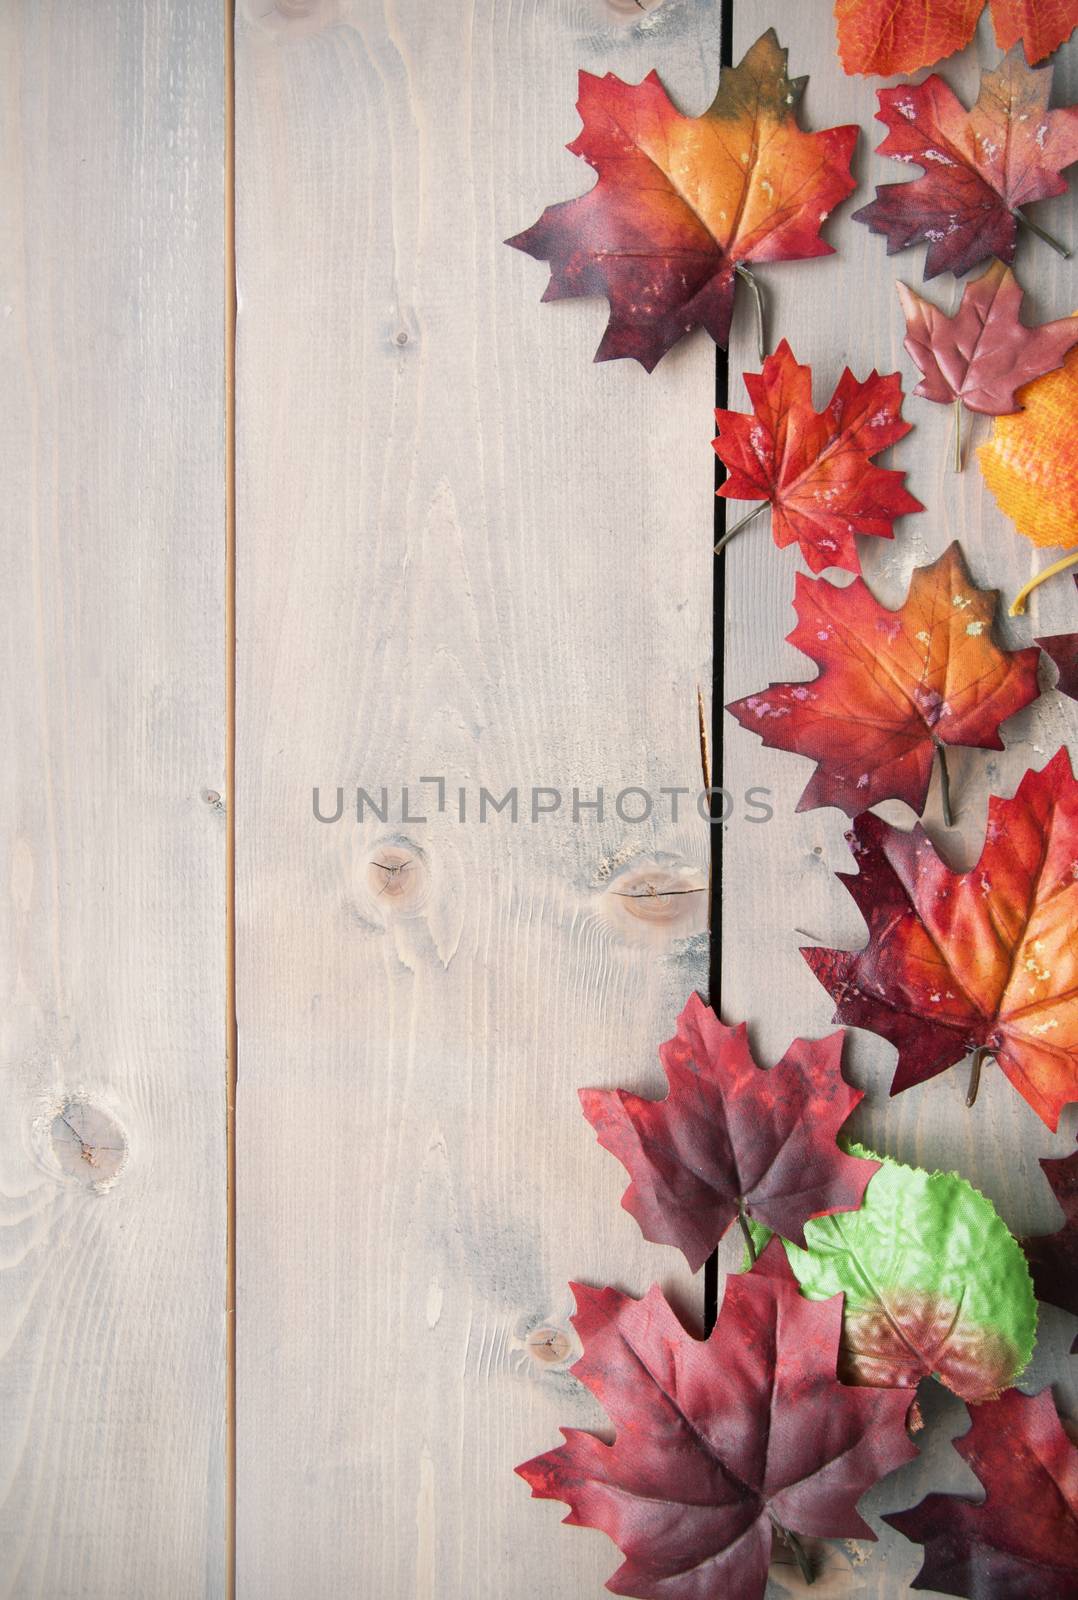 Autumn leaves background by unikpix